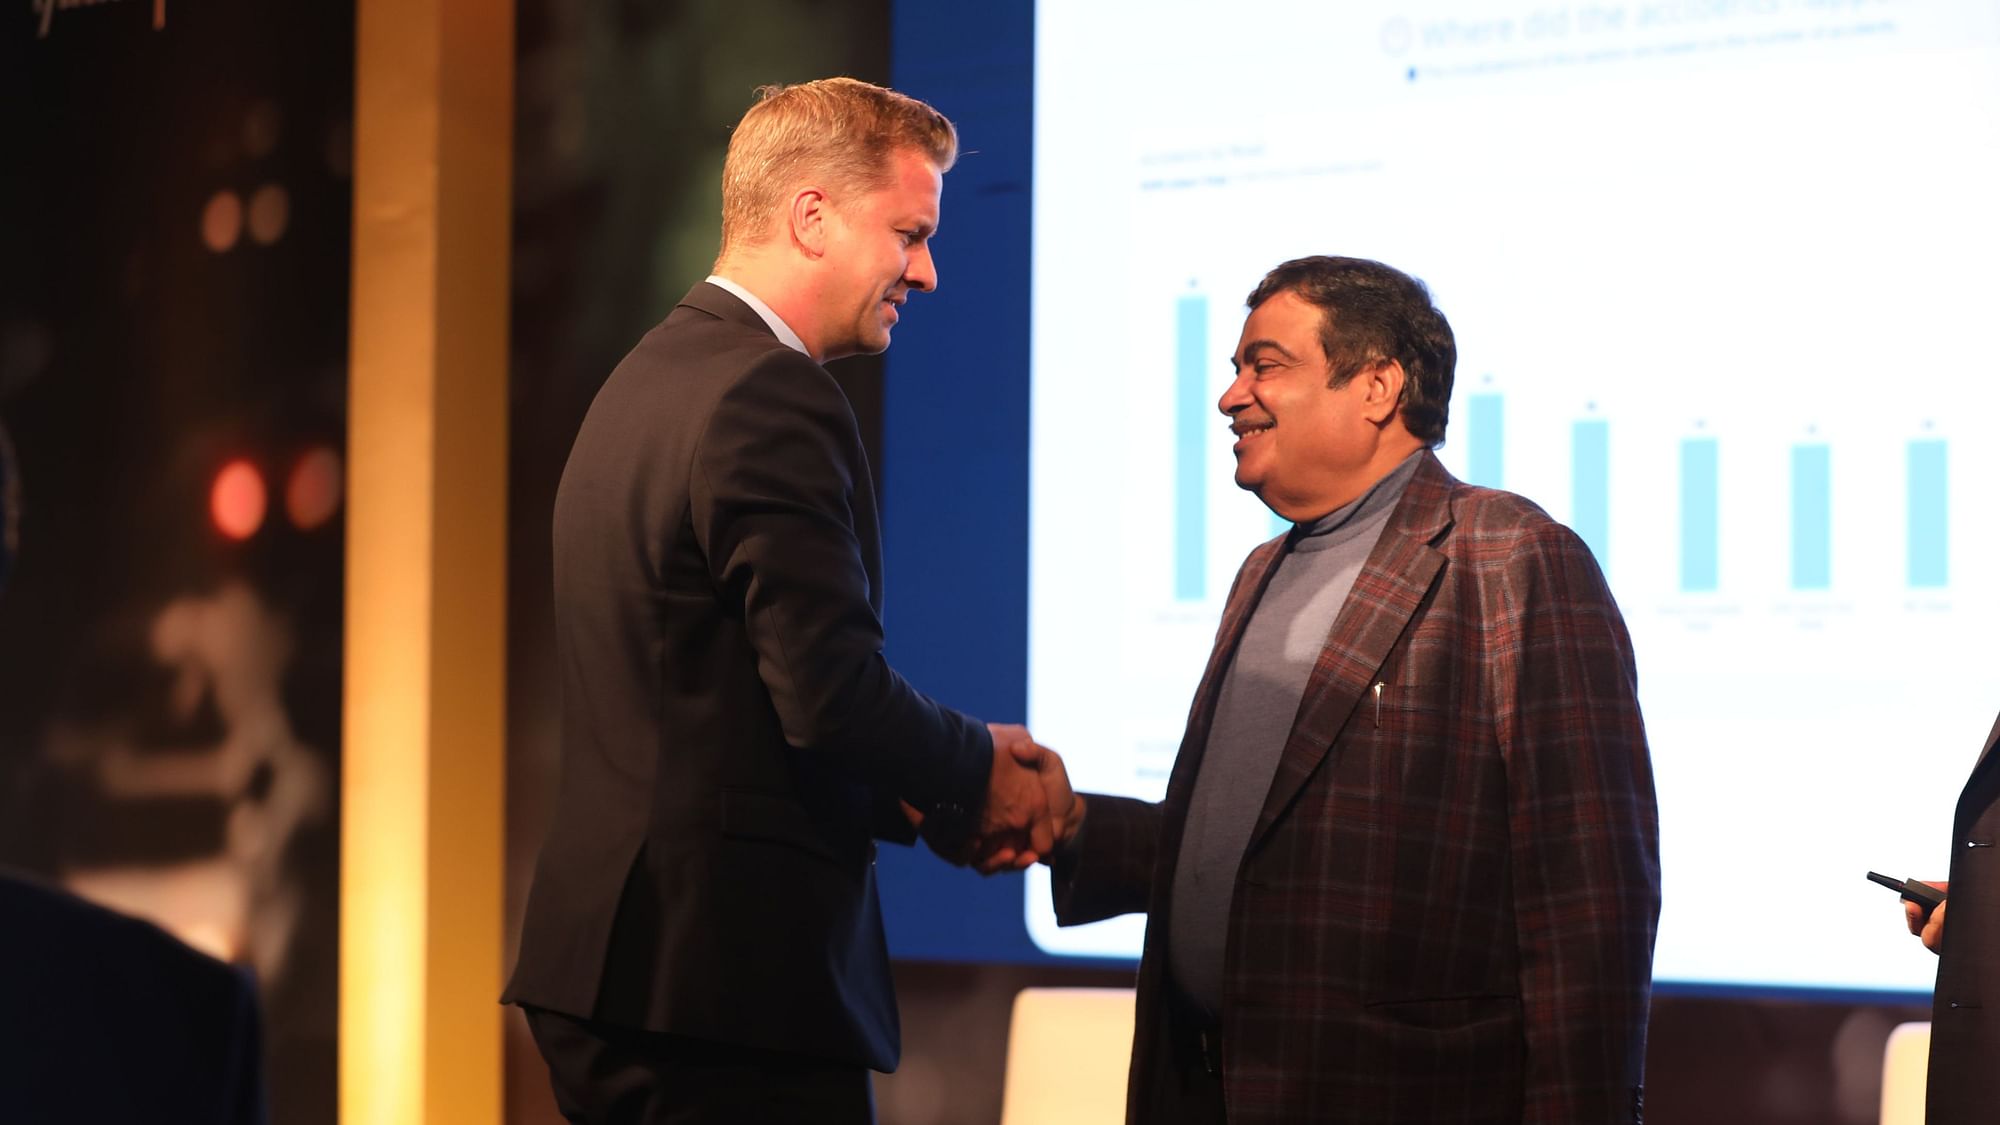 Ben Verhaert, President (South Asia), Anheuser-Busch InBev, with Nitin Gadkari, Union Minister of Road Transport and Highways, at the launch of SRFG dashboard.